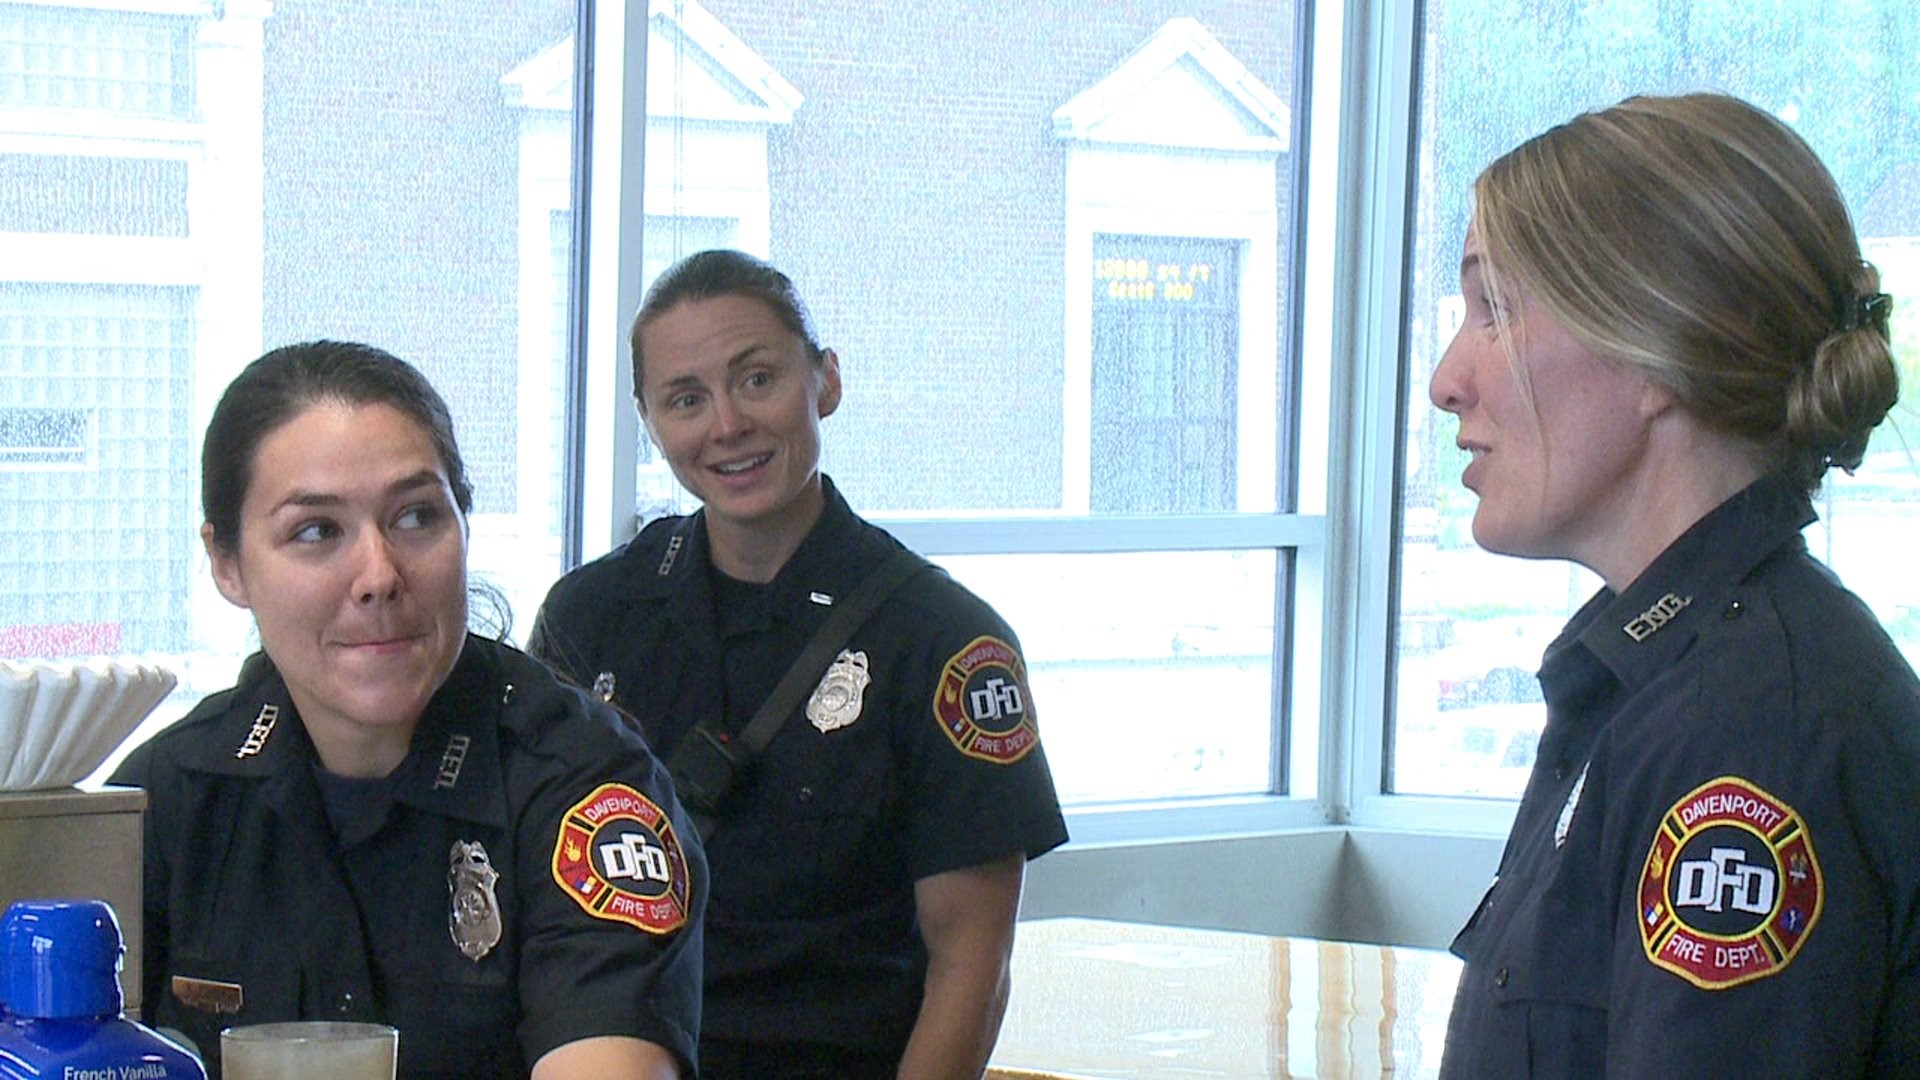 Davenport Fire makes history with female firegihters on shift